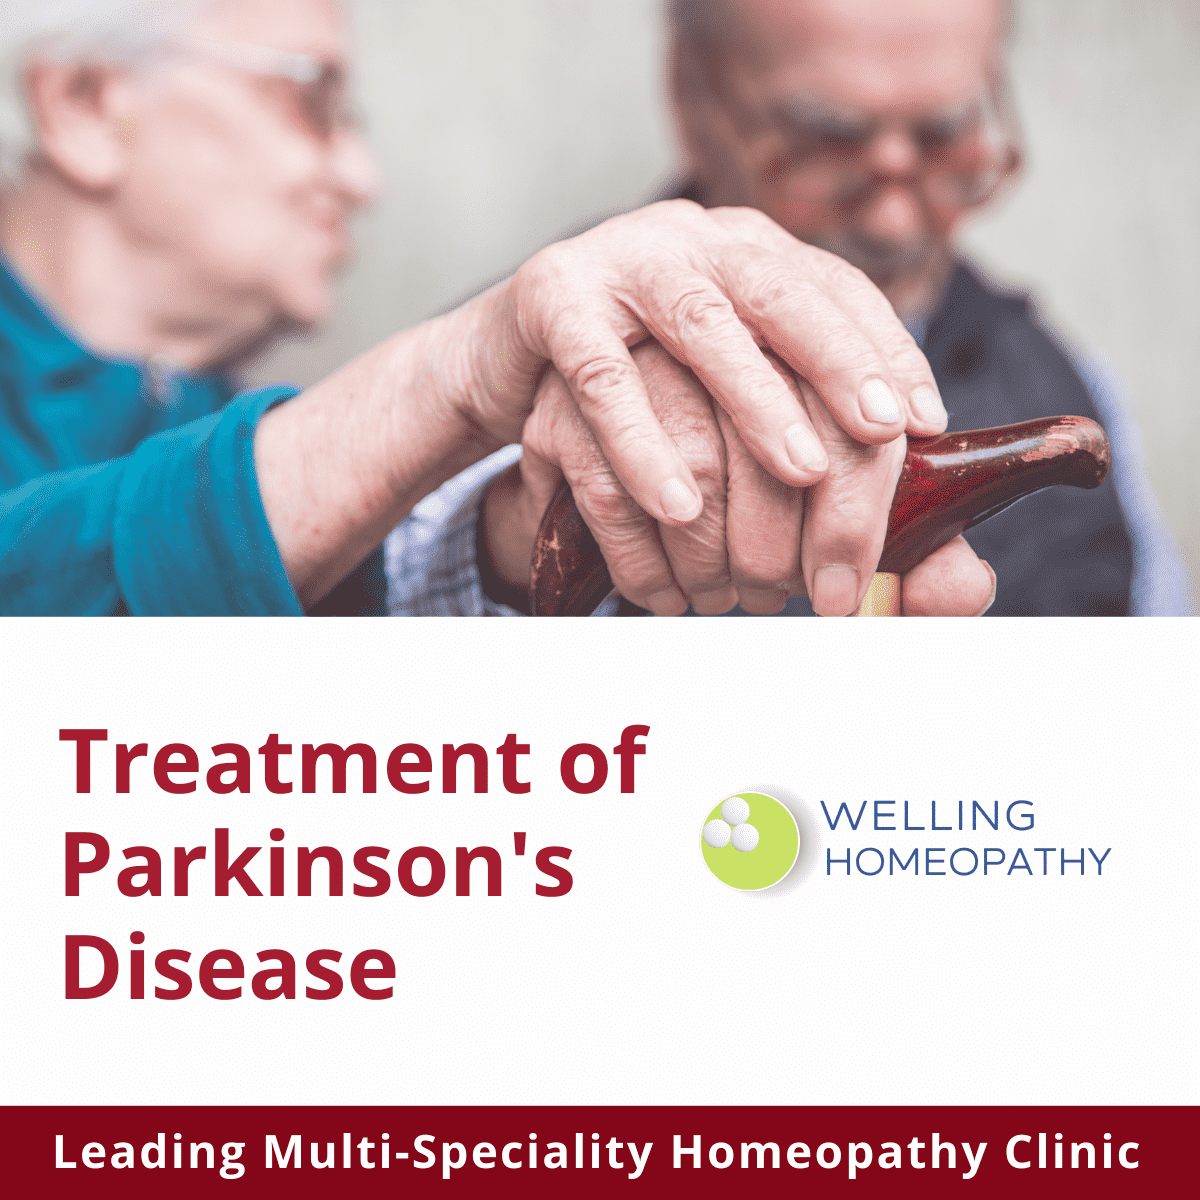 Homeopathy Treatment of Parkinson's Disease